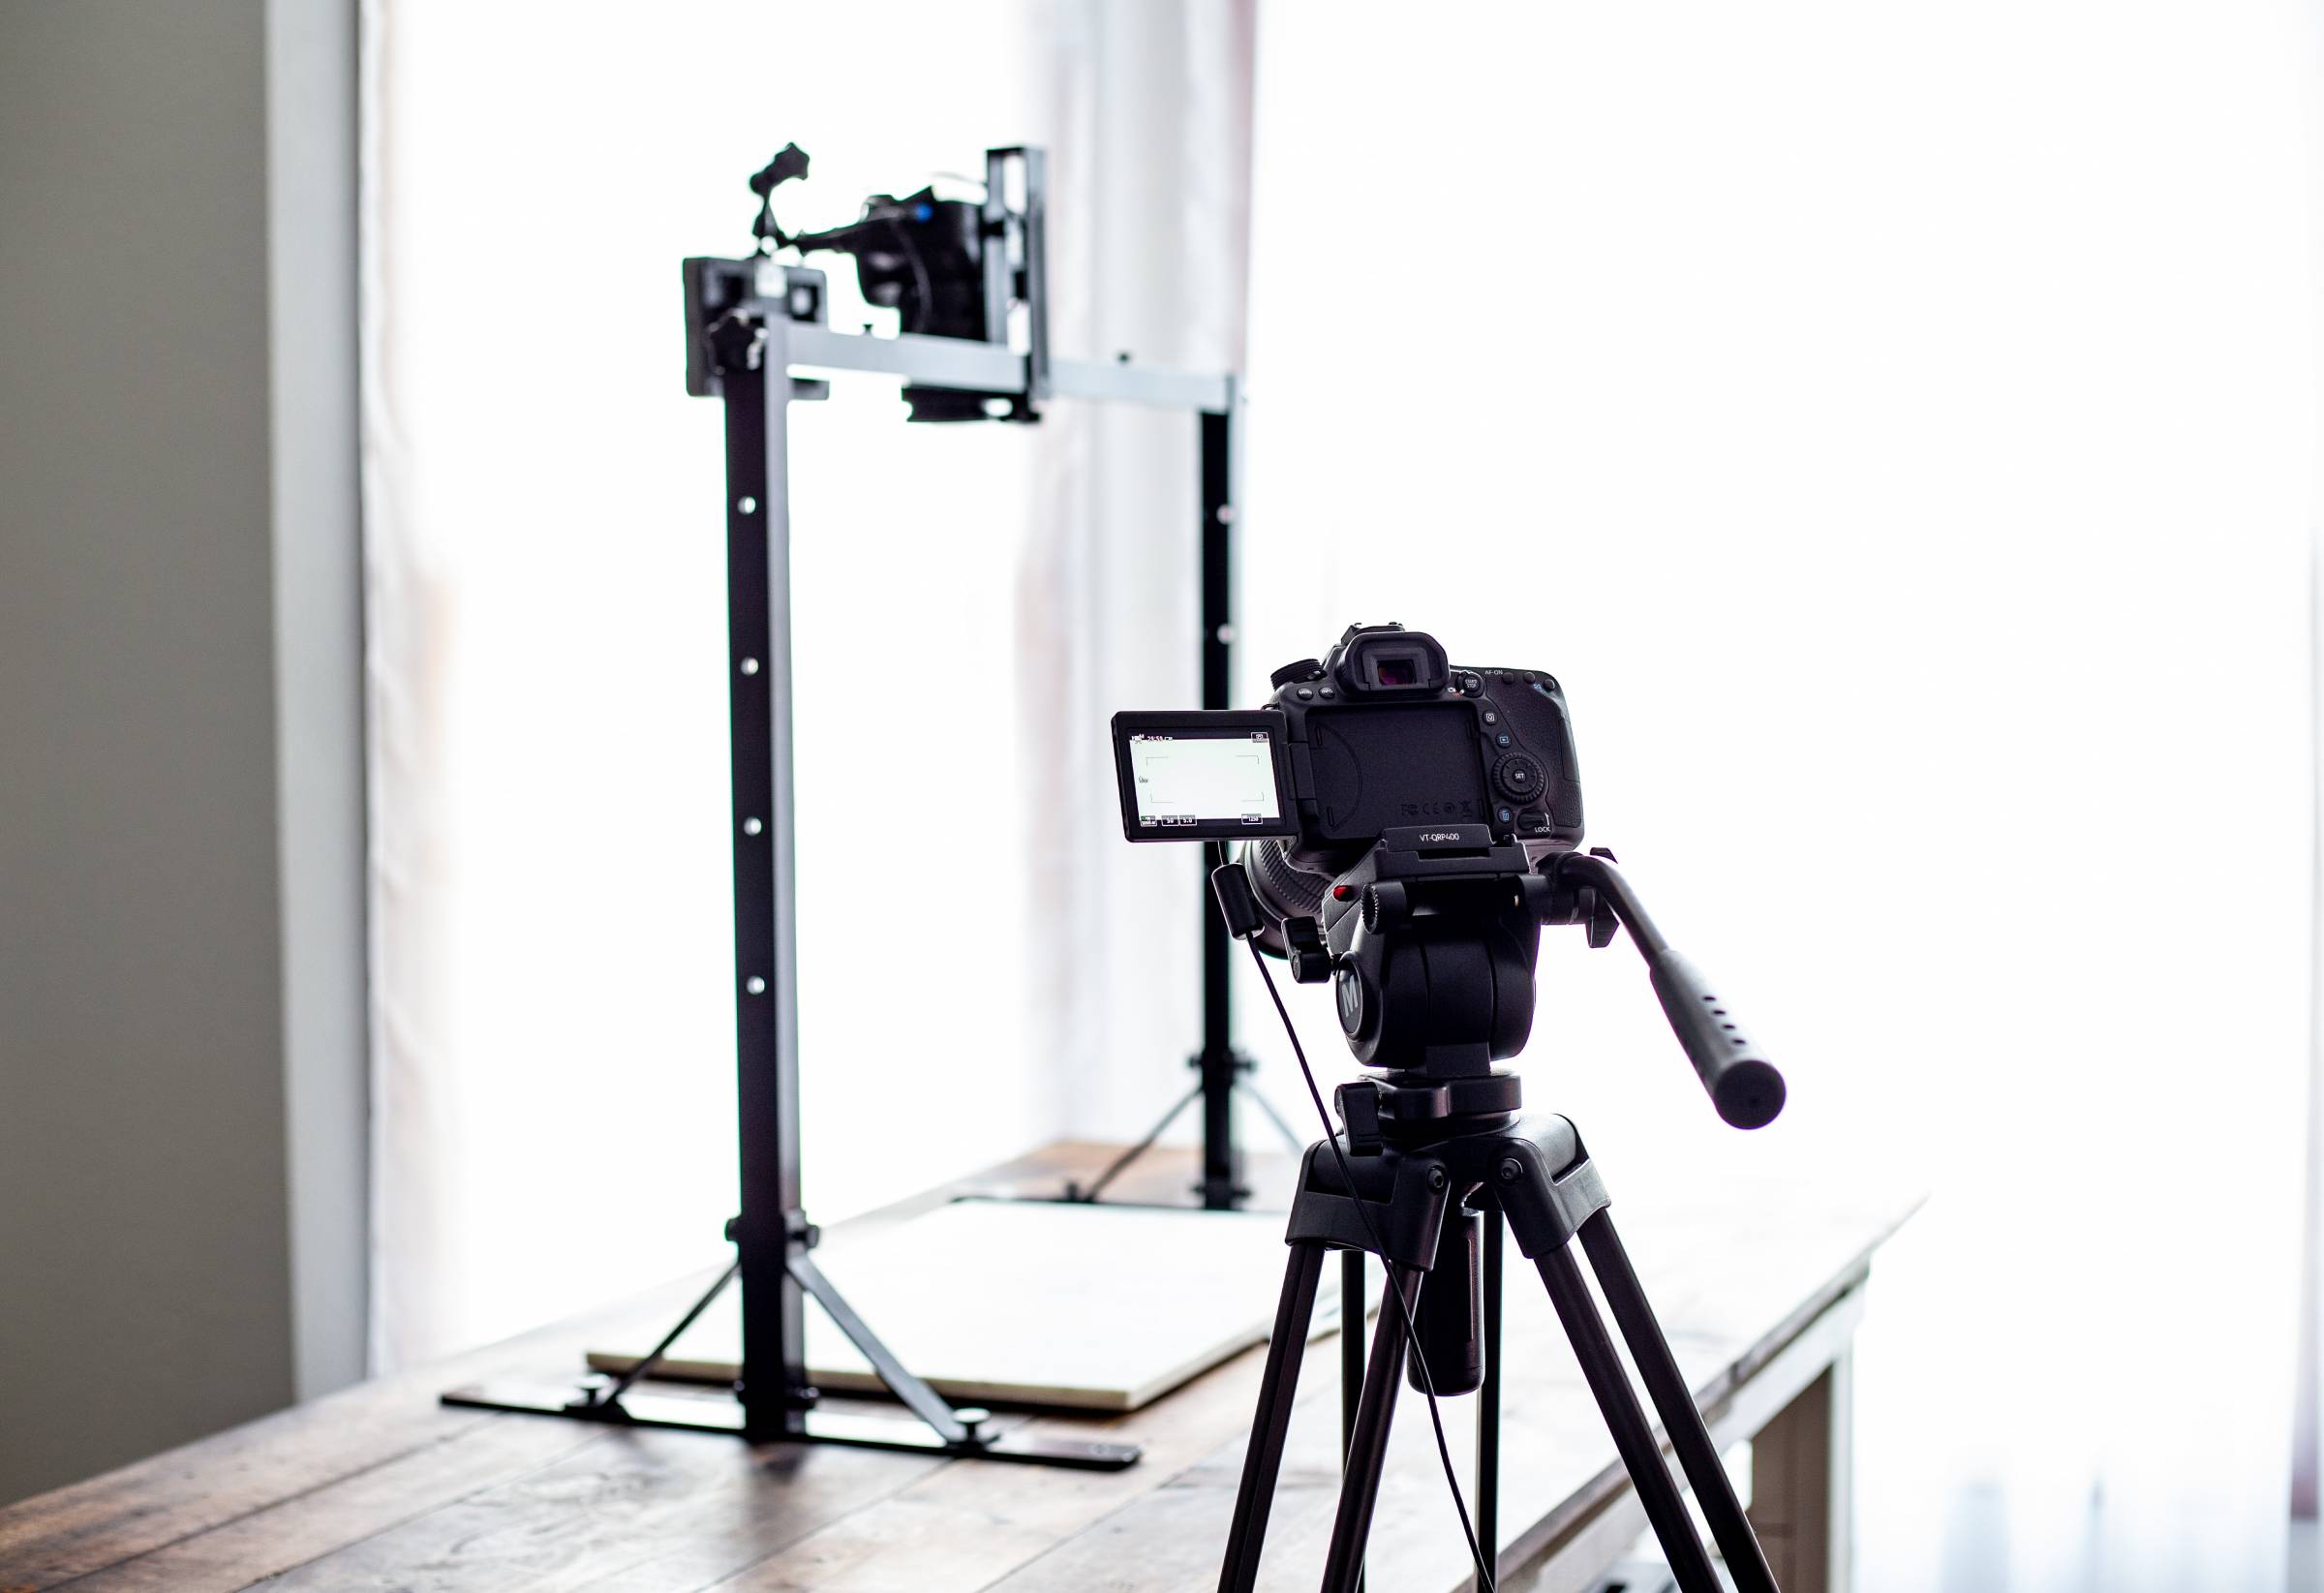 DSLR camera on a tripod and a DSLR camera in the distance on an overhead stand.